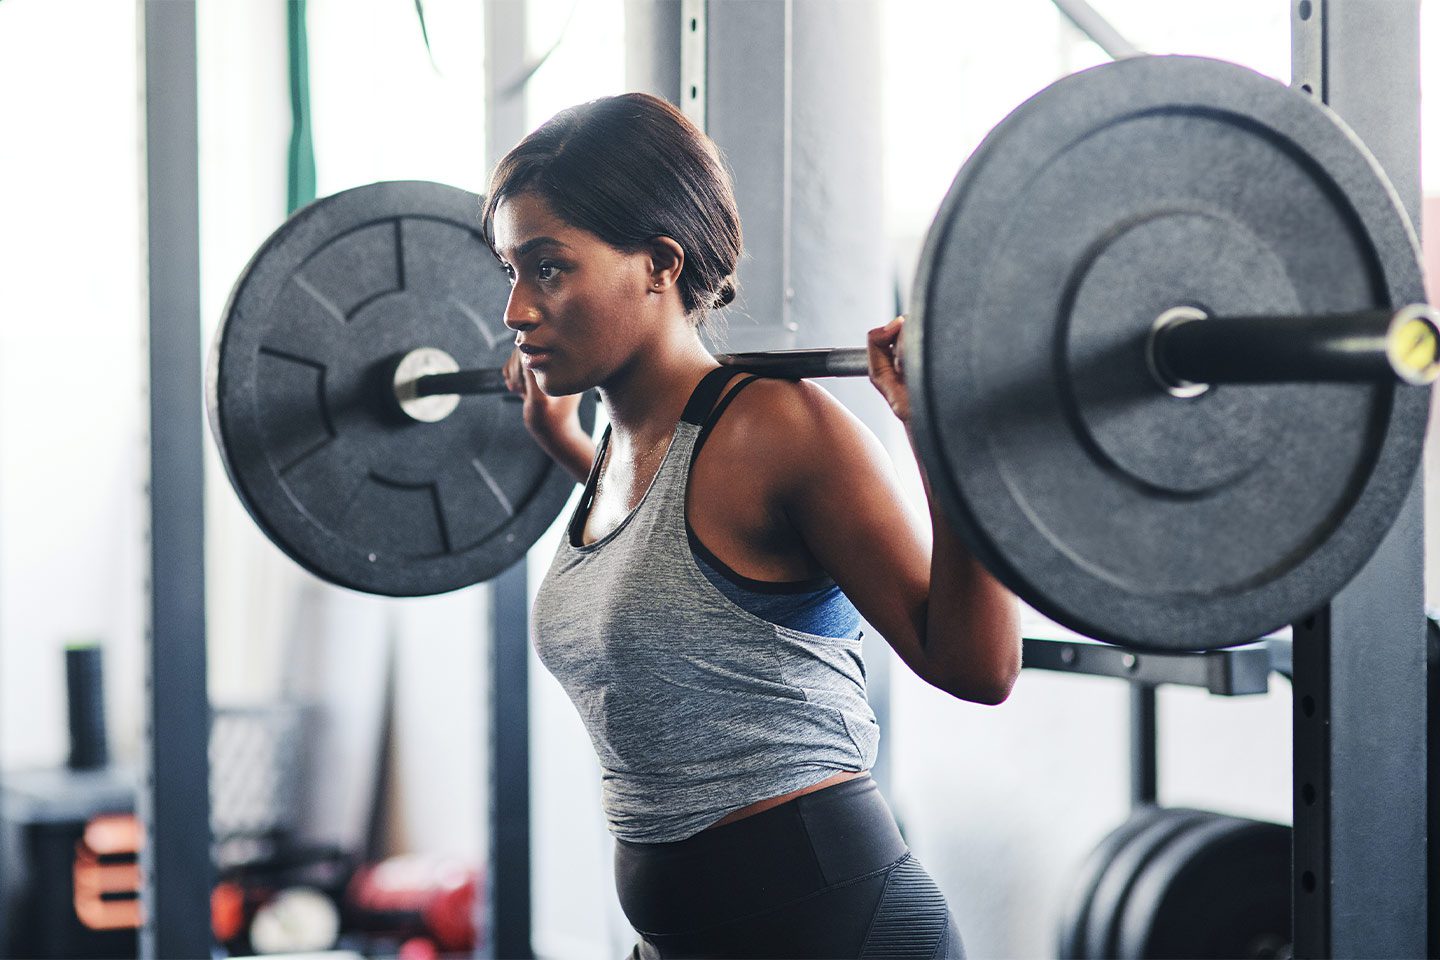 Woman doing squats with a barbell at the gym